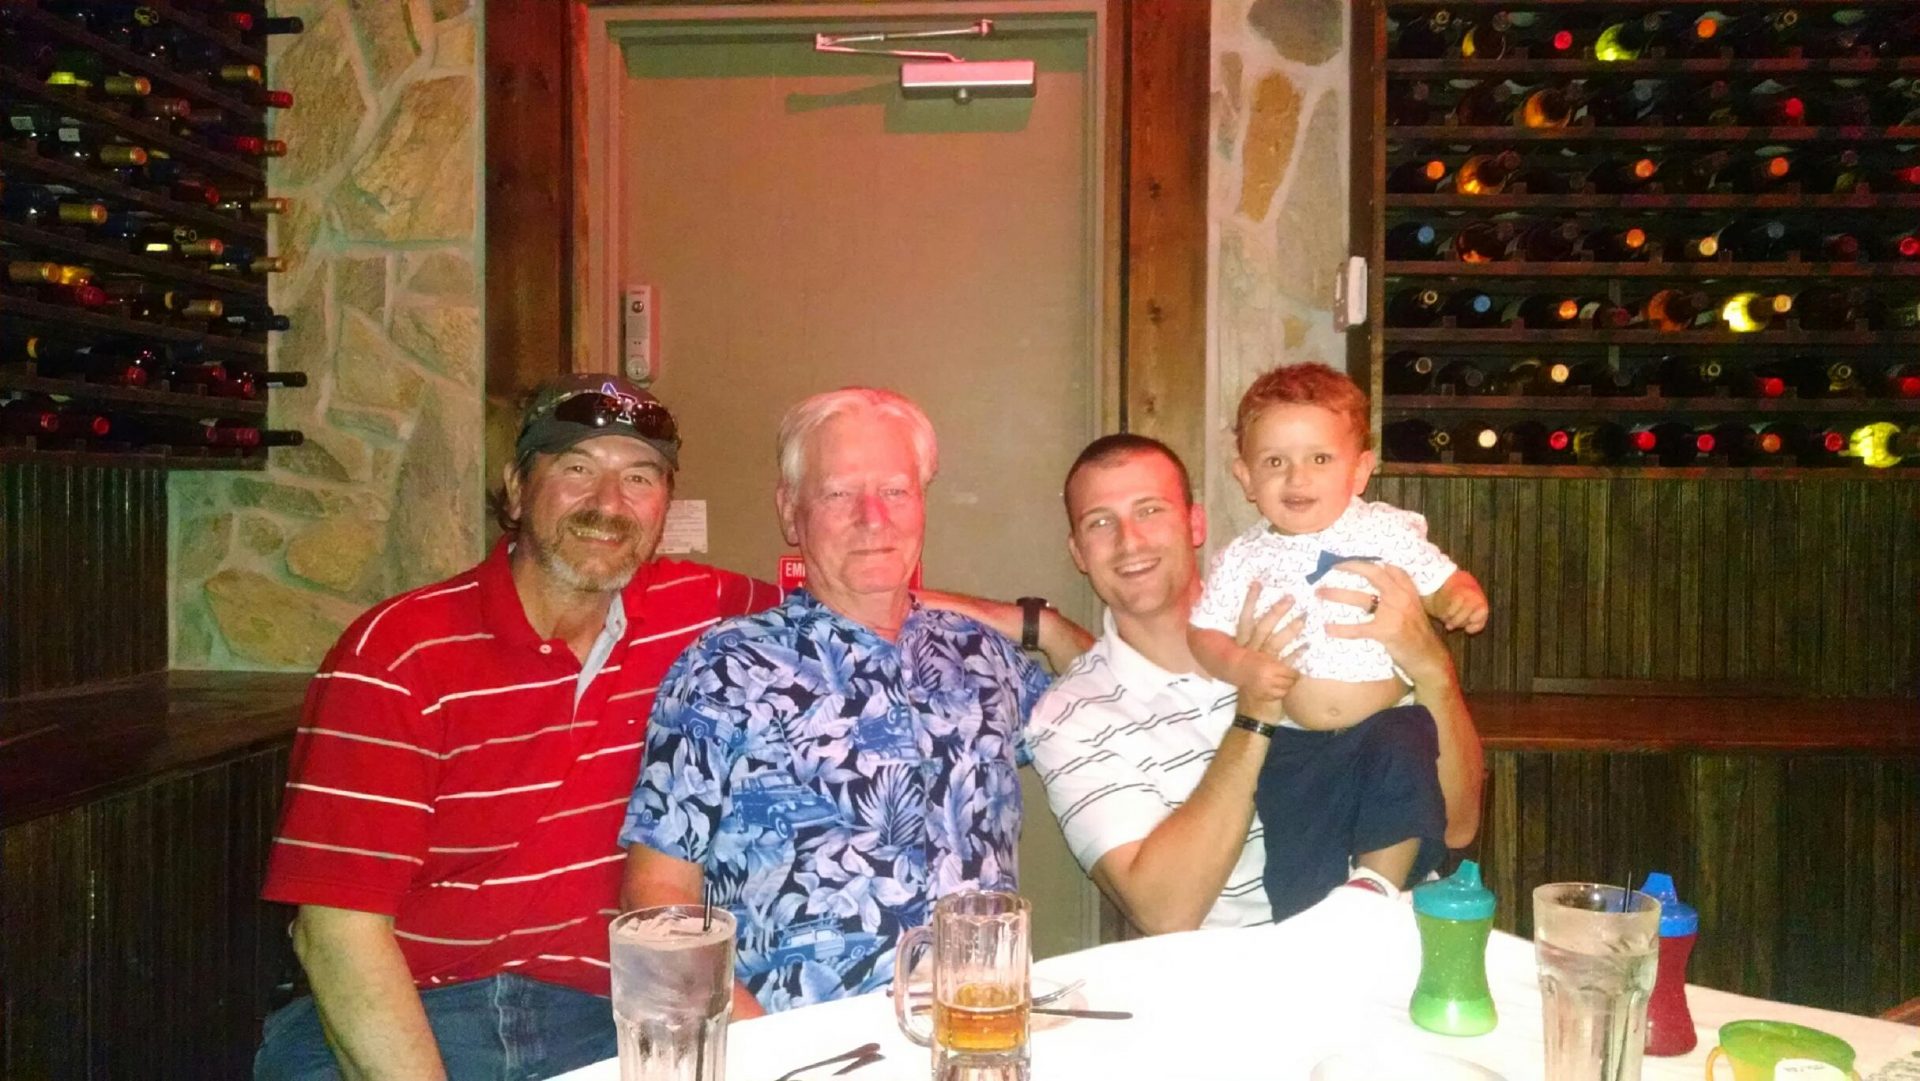 Trip to Destin, Florida 2014<br />
Father, Son, Grandson, Great Grand Son<br />
Frank, Mike, Chris and Gavin